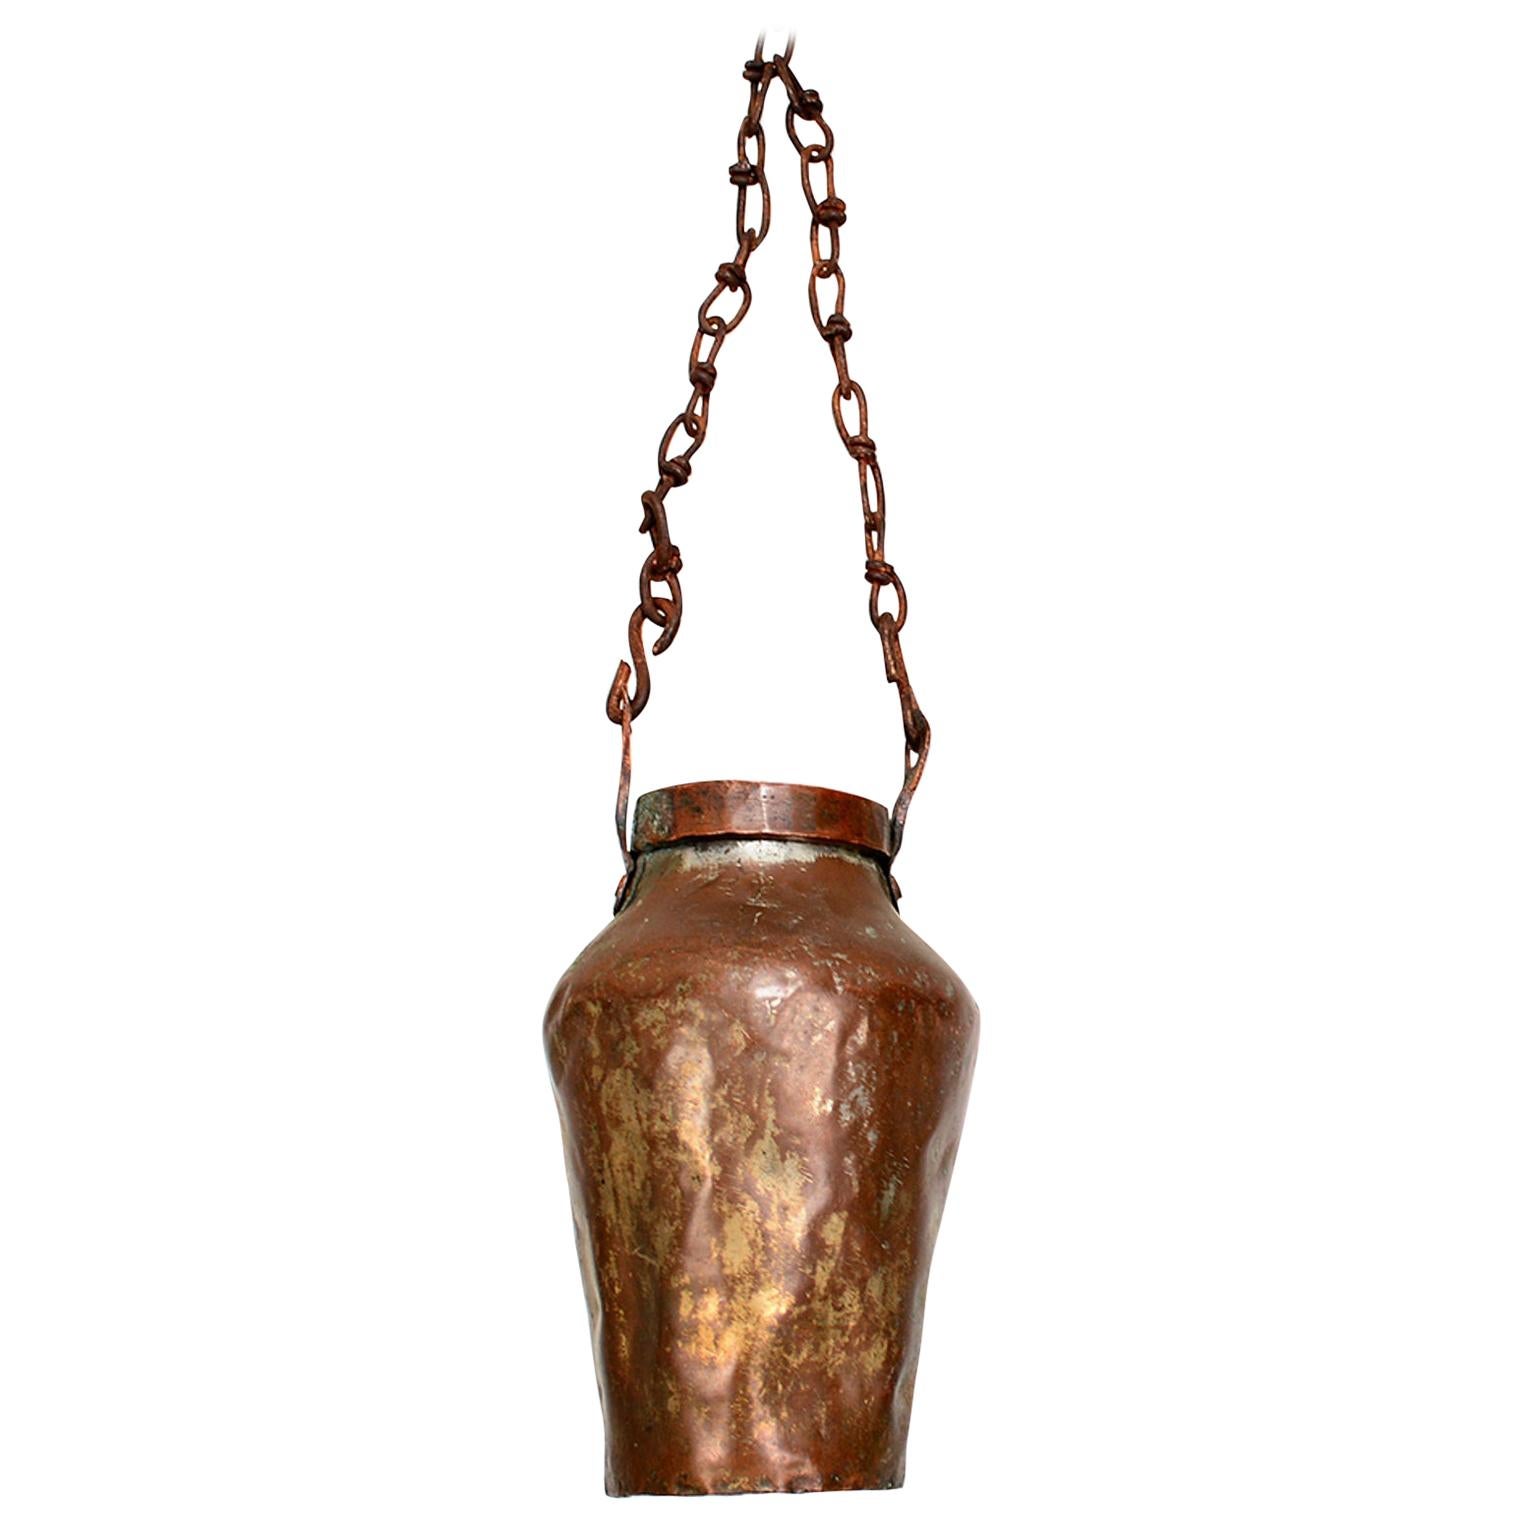 Old French Hanging Pot Vase Planter in Hammered Copper & Brass Heavy Chain 1800s